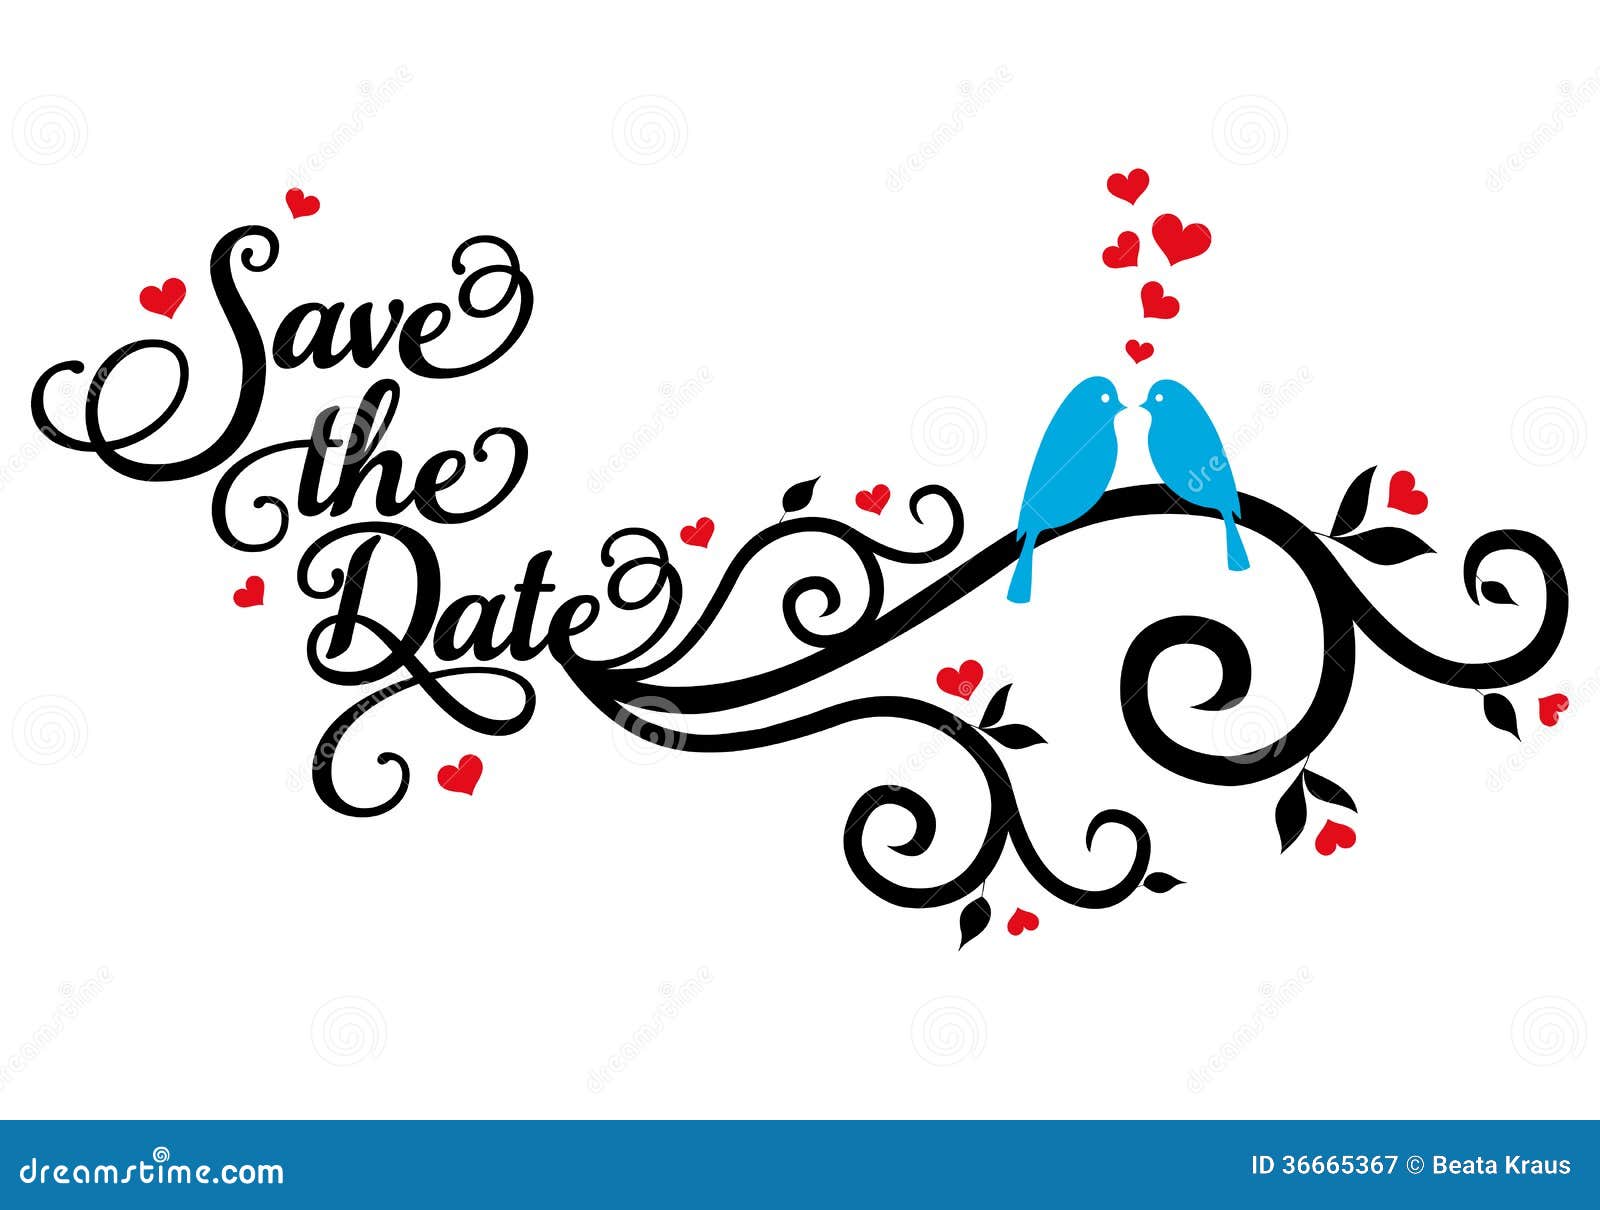 Save the date clip art free